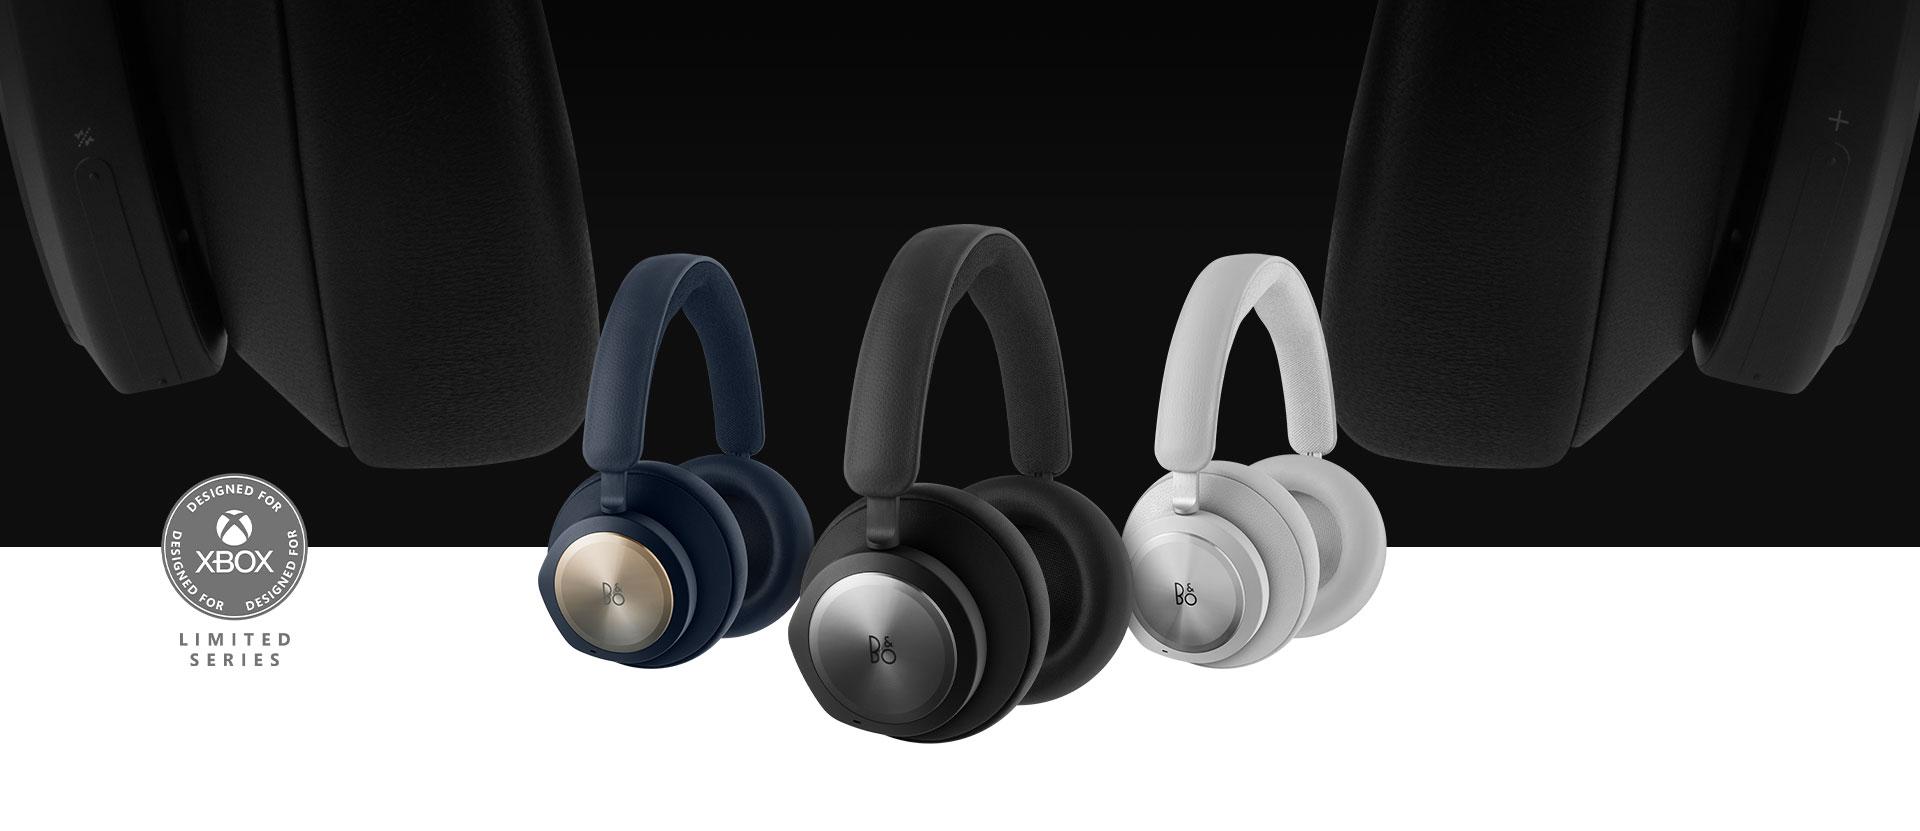 Designed for Xbox badge, Limited Series, Bang and Olufsen black headset in front with the grey and navy headset beside it